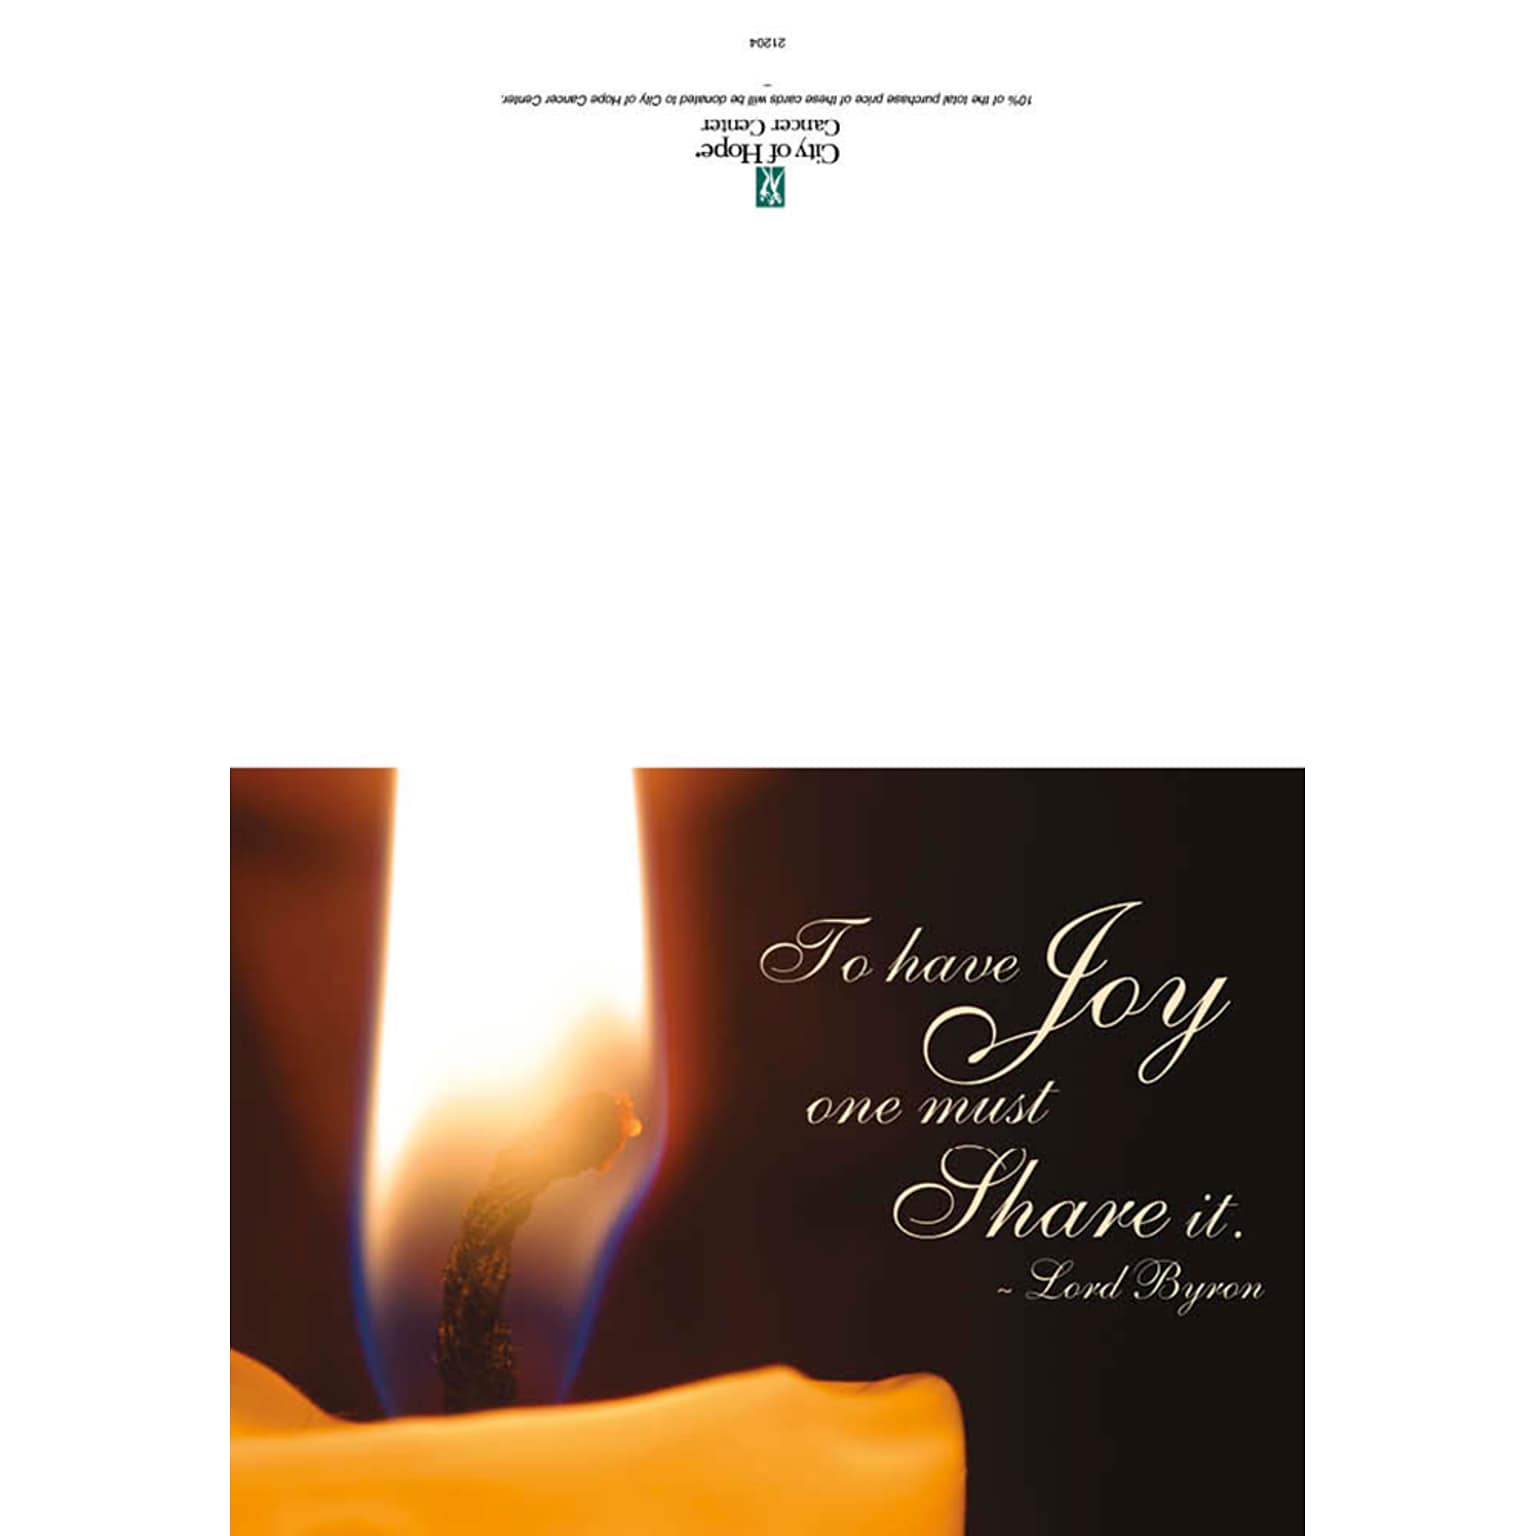 To have Joy one must share it - lord byron - candle - 7 x 10 scored for folding to 7 x 5, 25 cards w/A7 envelopes per set